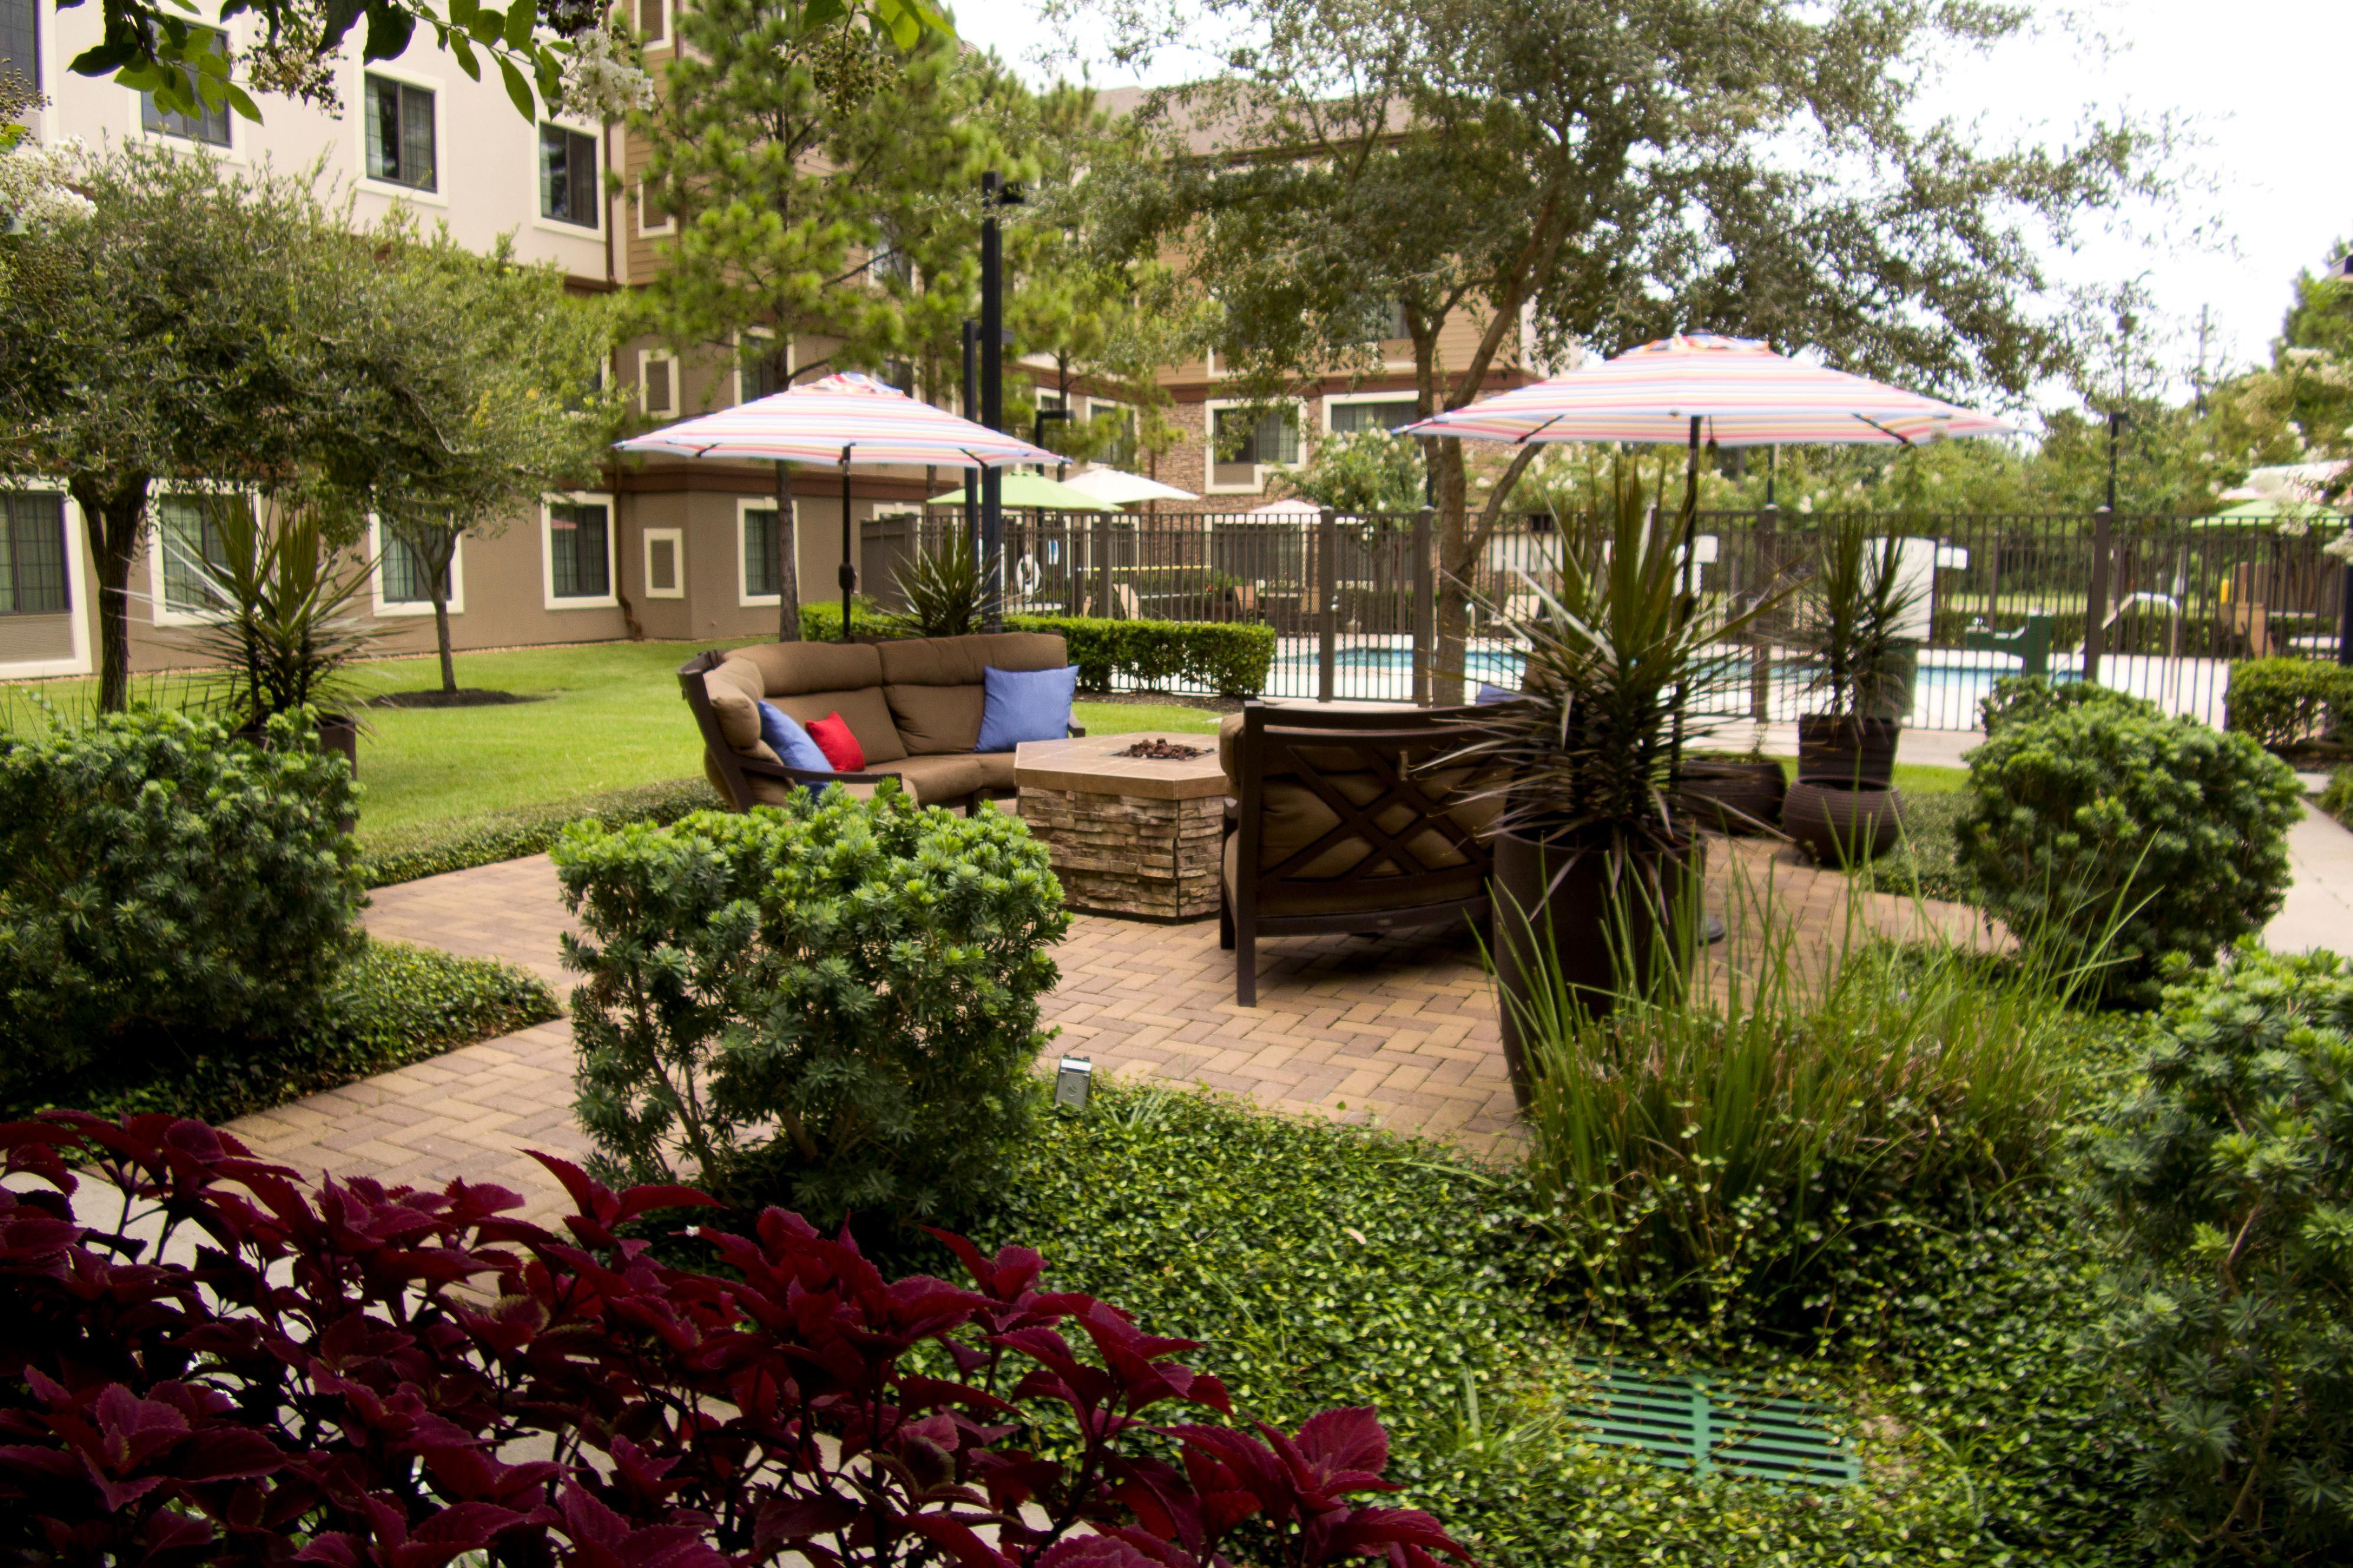 Hotel offers plenty of surrounding green space enabling you to maintain your social distance.